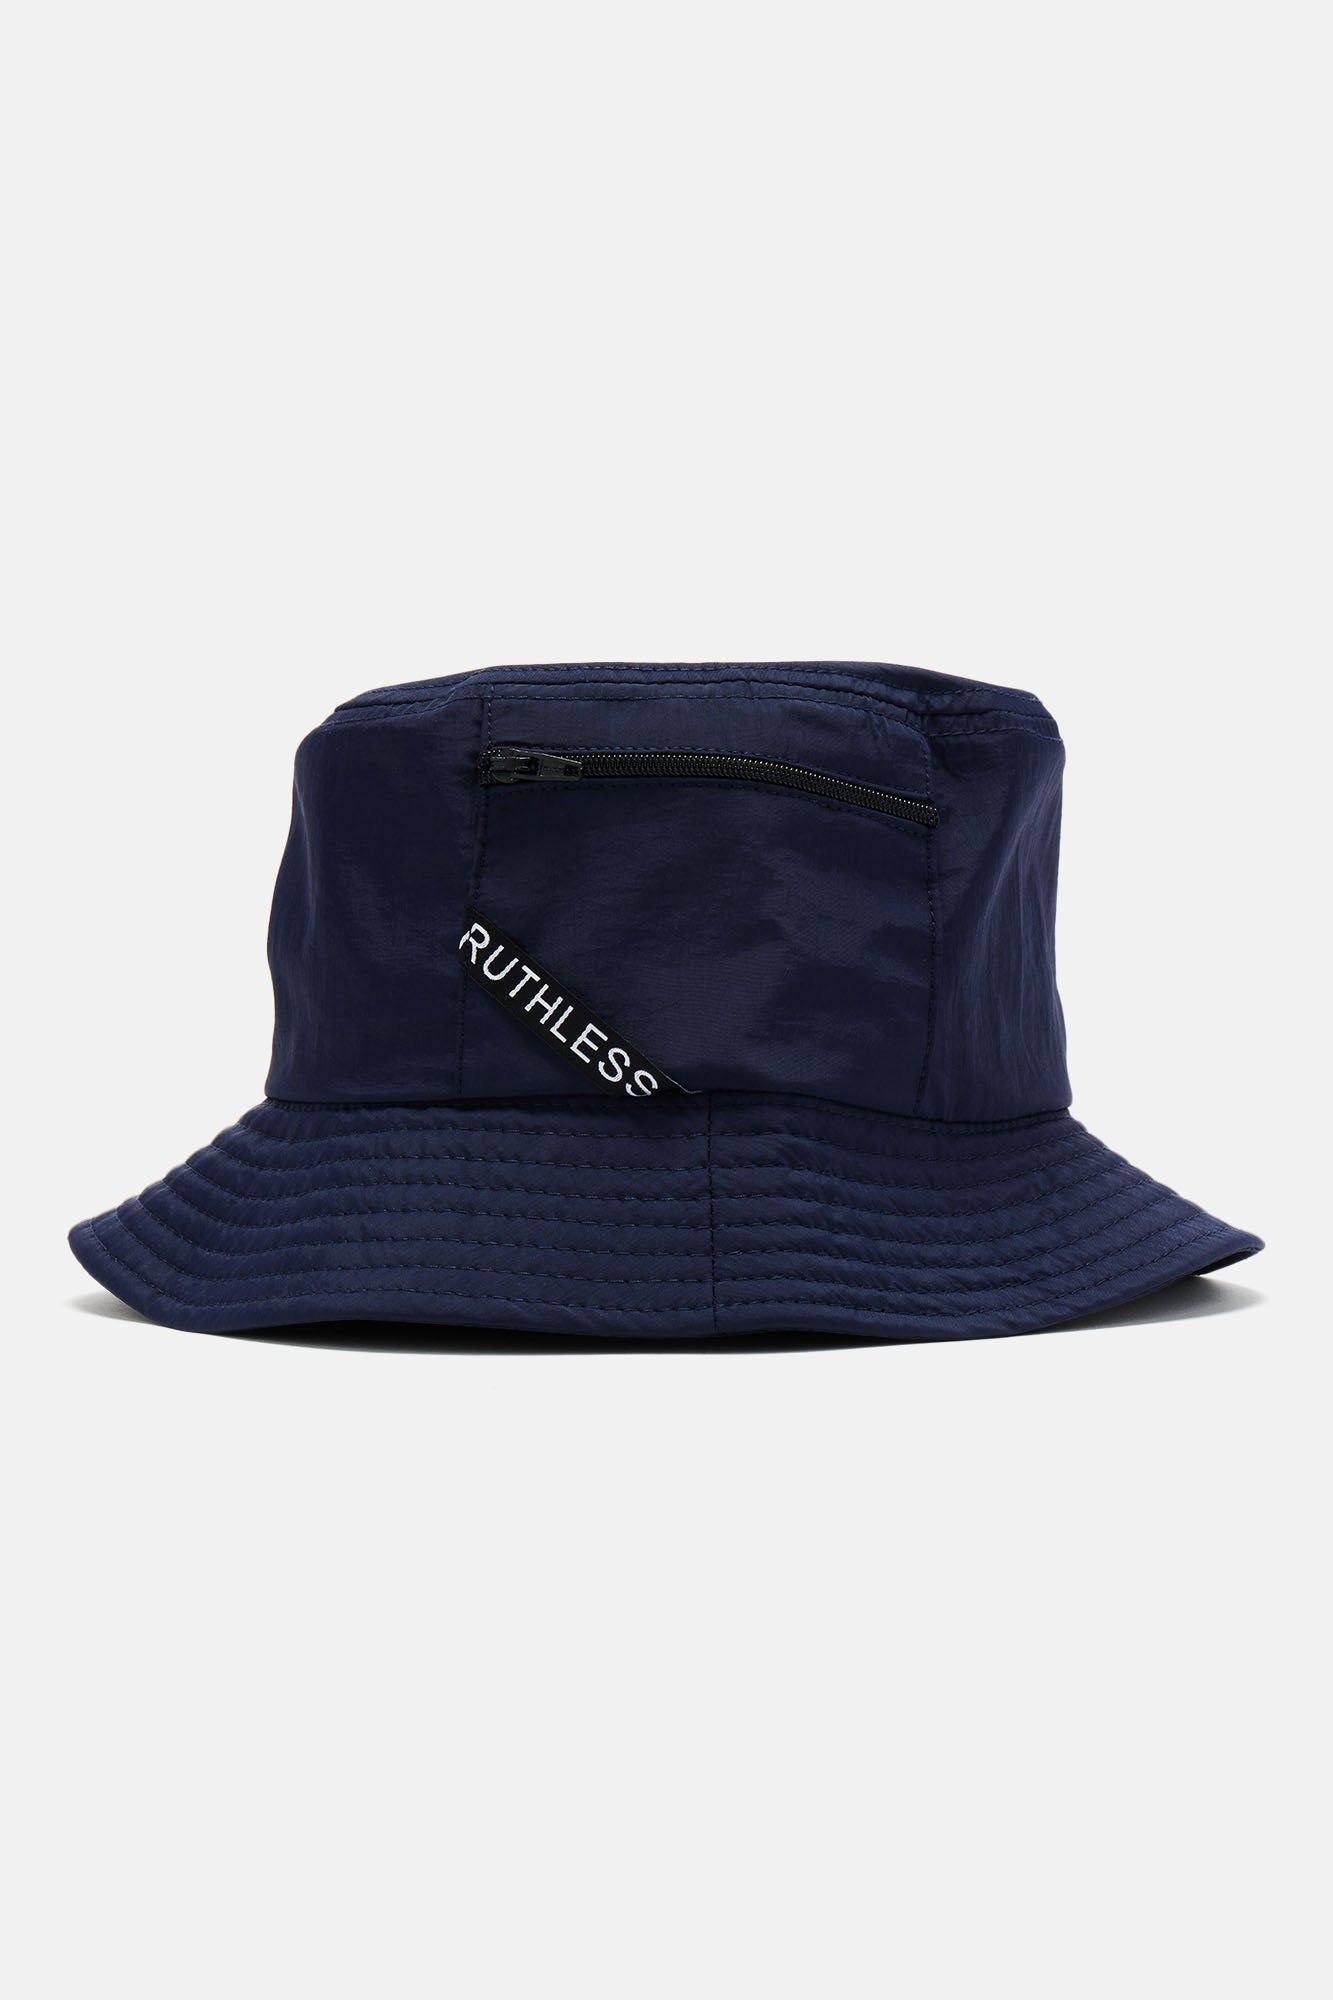 Navy Zip-It Bucket Hat: The Ultimate Accessory for Style and Sun Protection